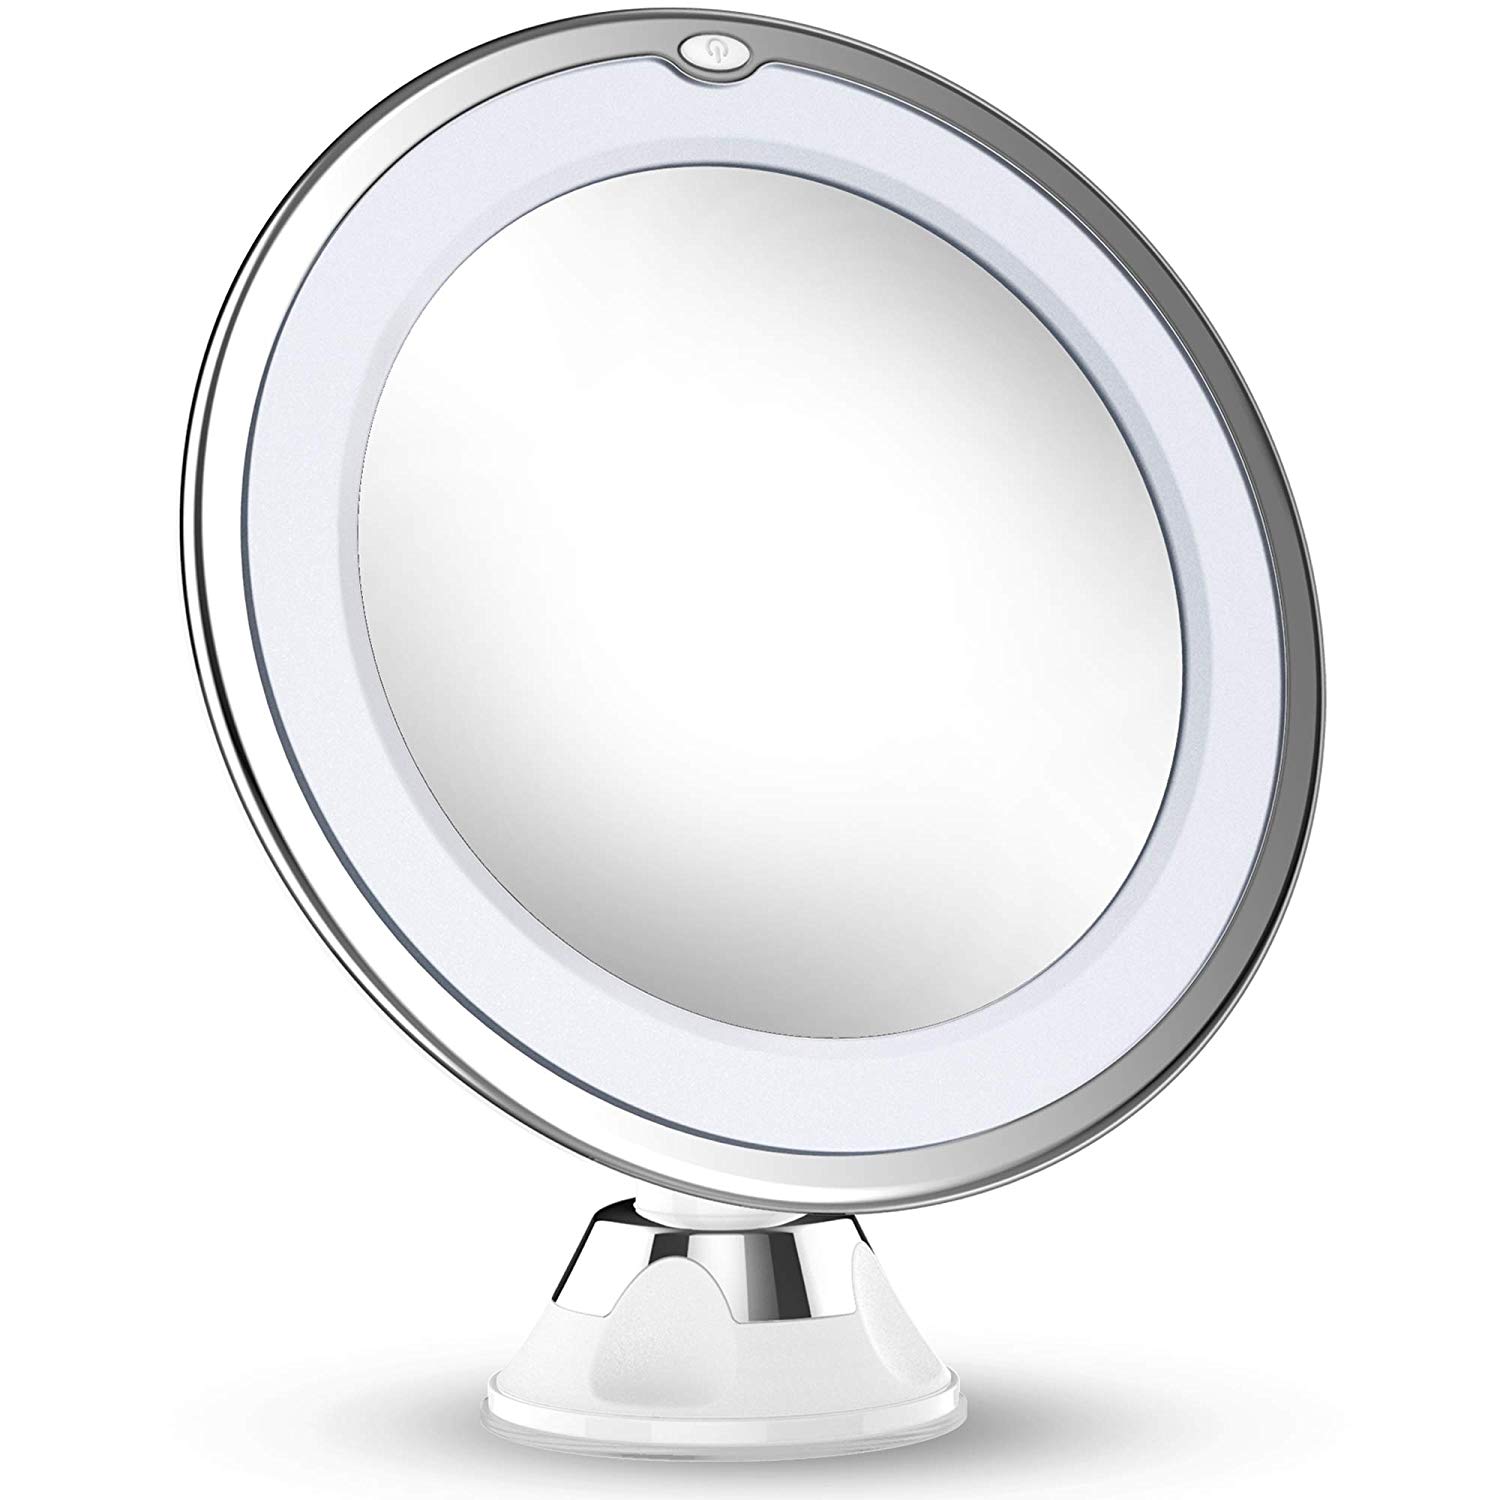 Live Streaming for Make-up ELEGIANT Makeup Mirror Dual Power Supply Selfie Photos 180°Adjustable Rotation White 76 LED Lighted Mirror with Touch Sensor Dimming and 10X Magnifying Mirror